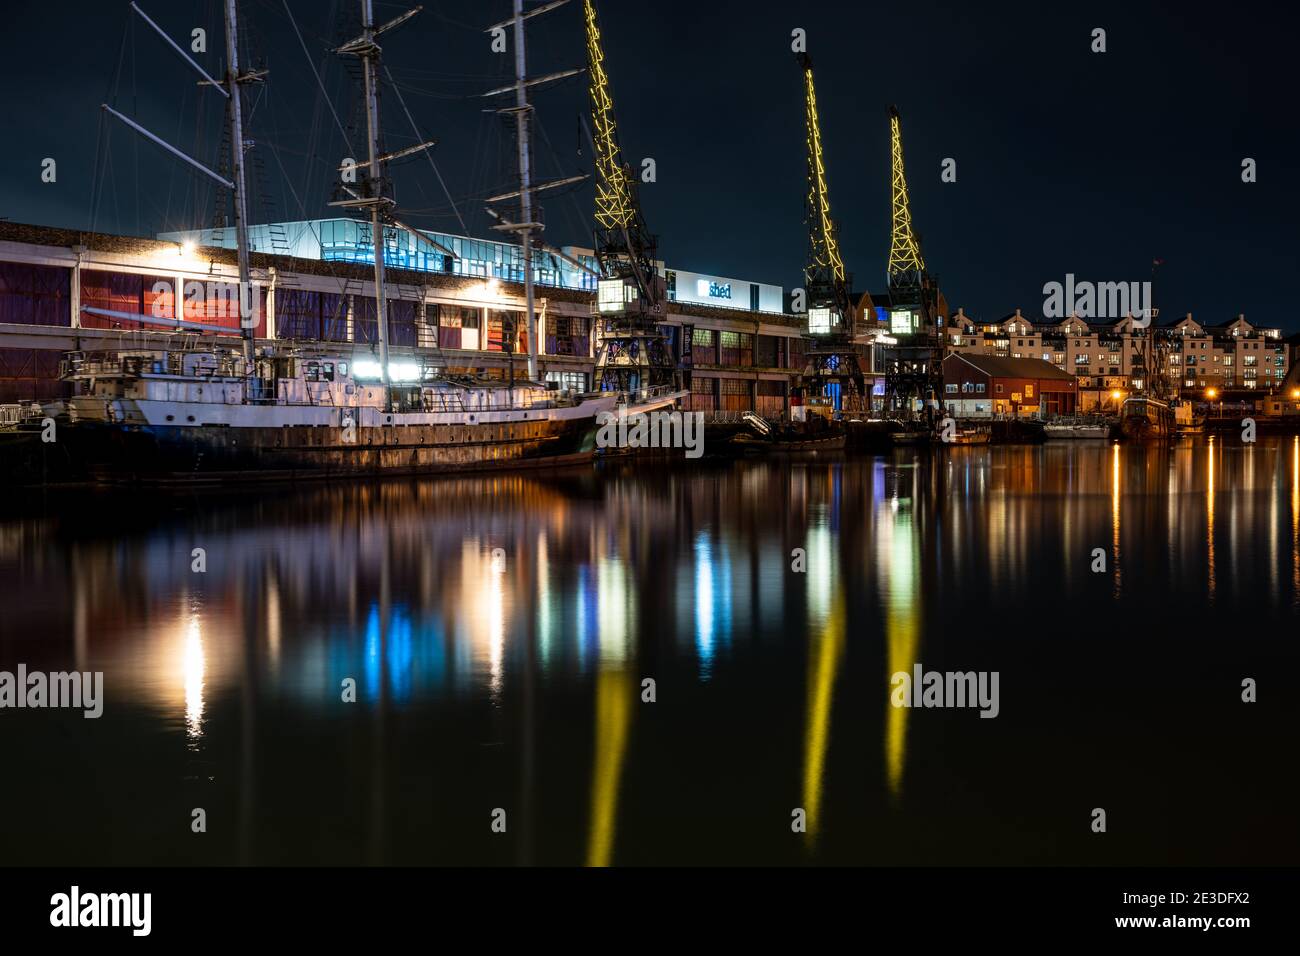 Christmas lights decorate old dock cranes on the quayside of M Shed museum on Bristol's Floating Harbour. Stock Photo